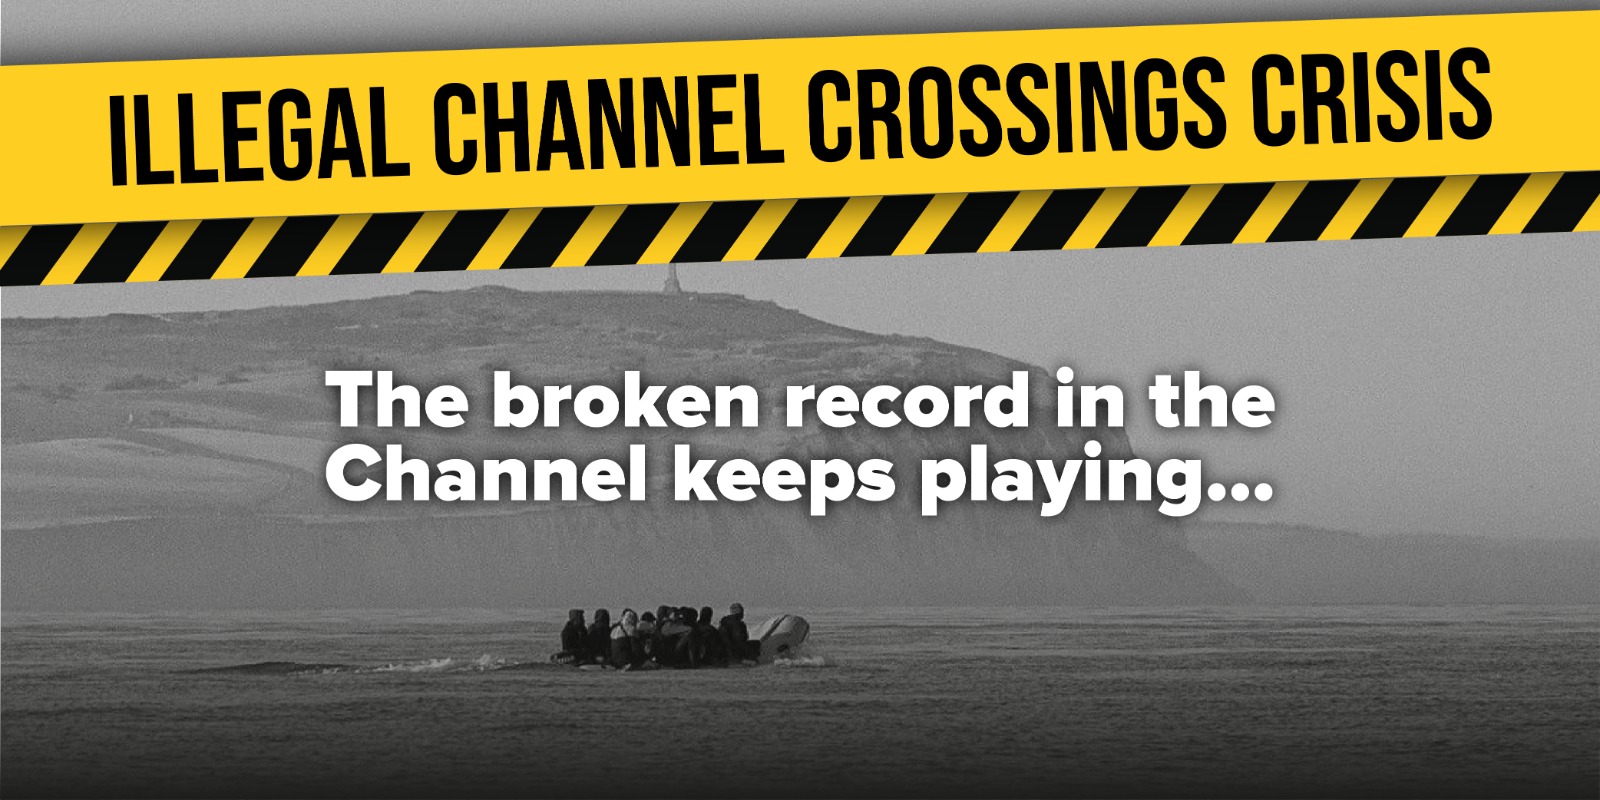 illegal-channel-crisis-3-key-facts-to-remember